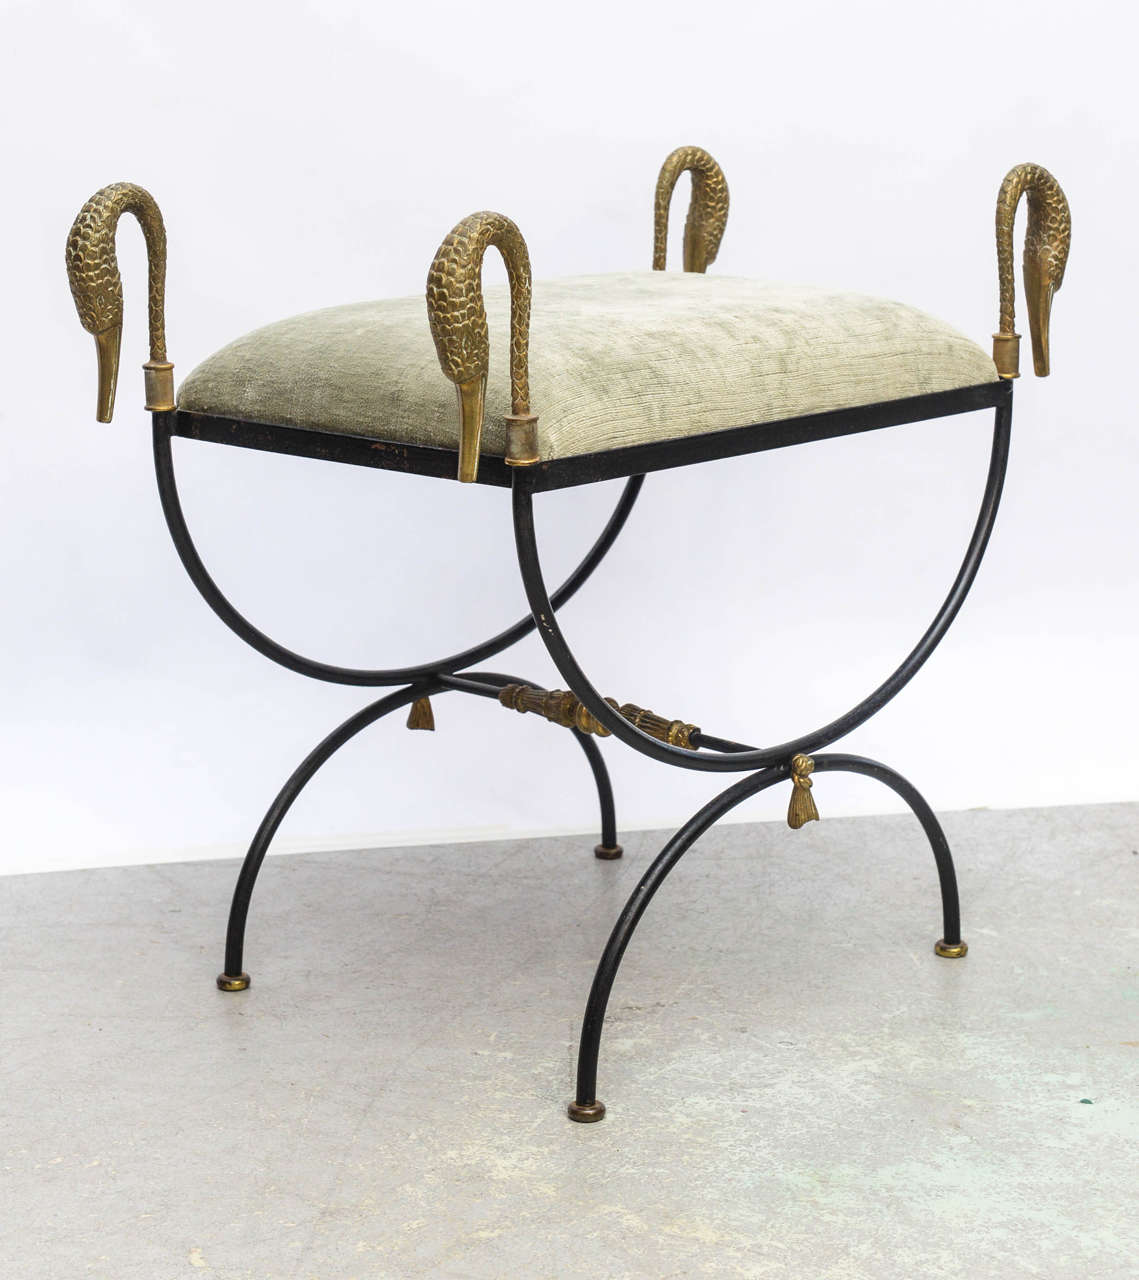 Elegant pair of iron benches with chased bronze swan heads. Reupholstered in sage green silk velvet.